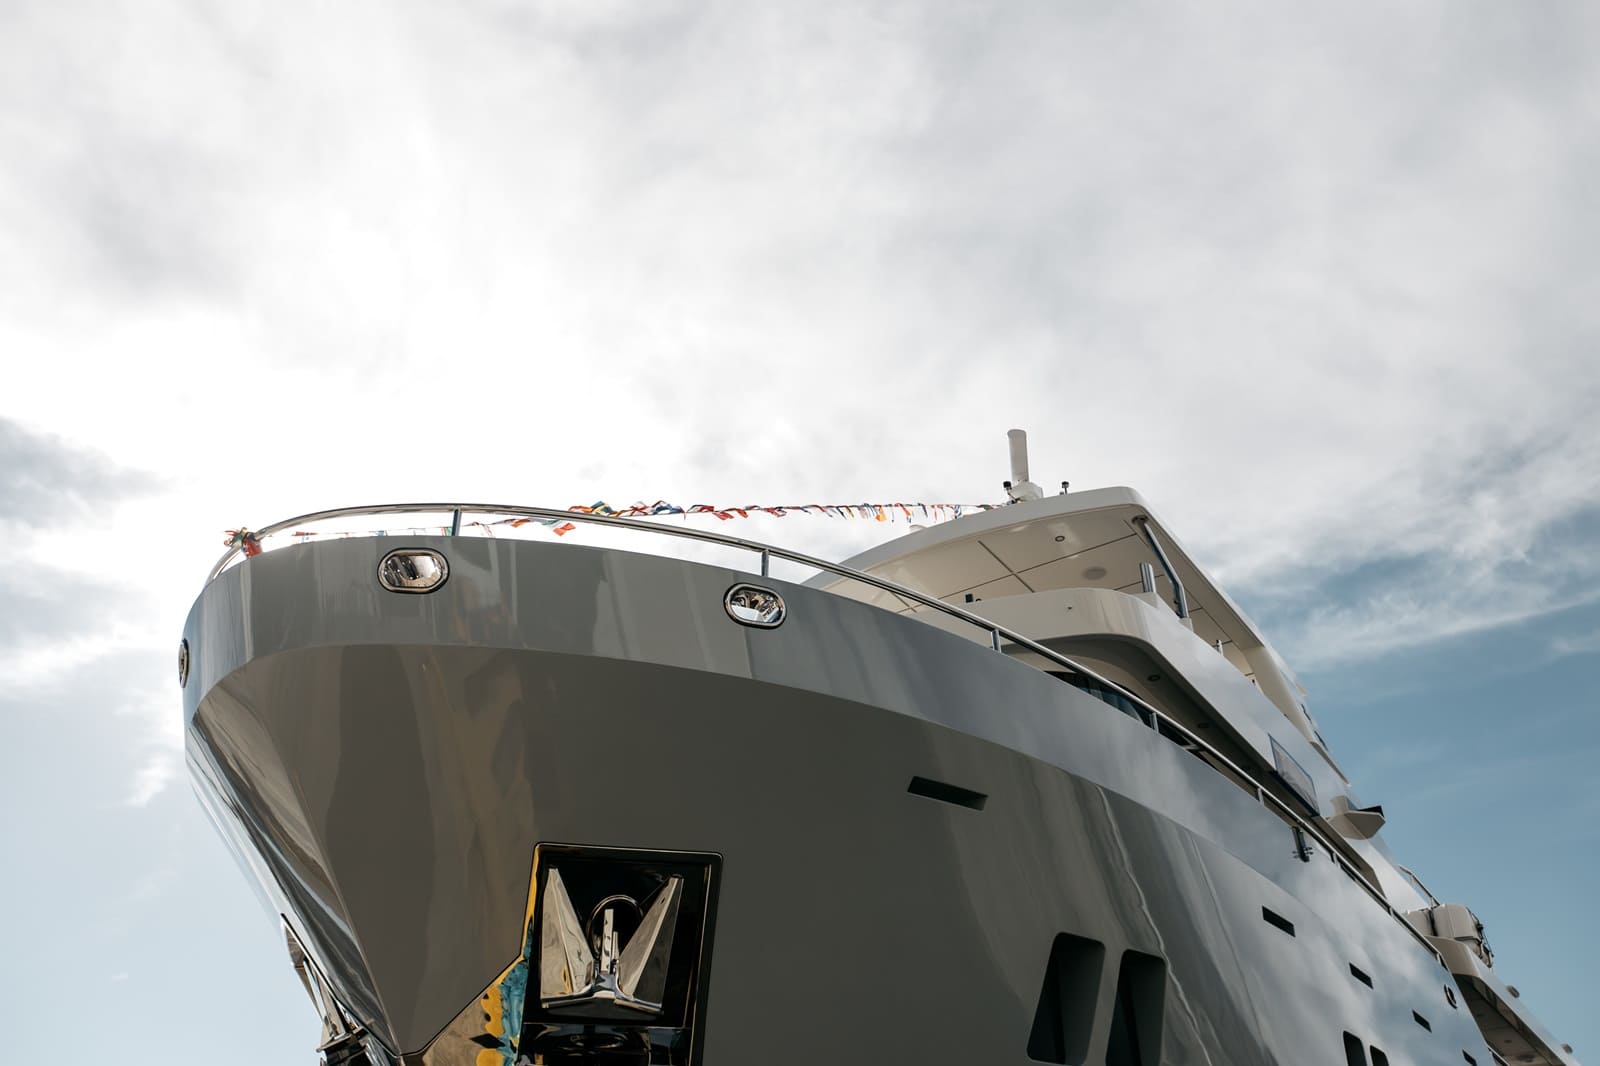 Launched! A new B72 yacht is ready to set sail